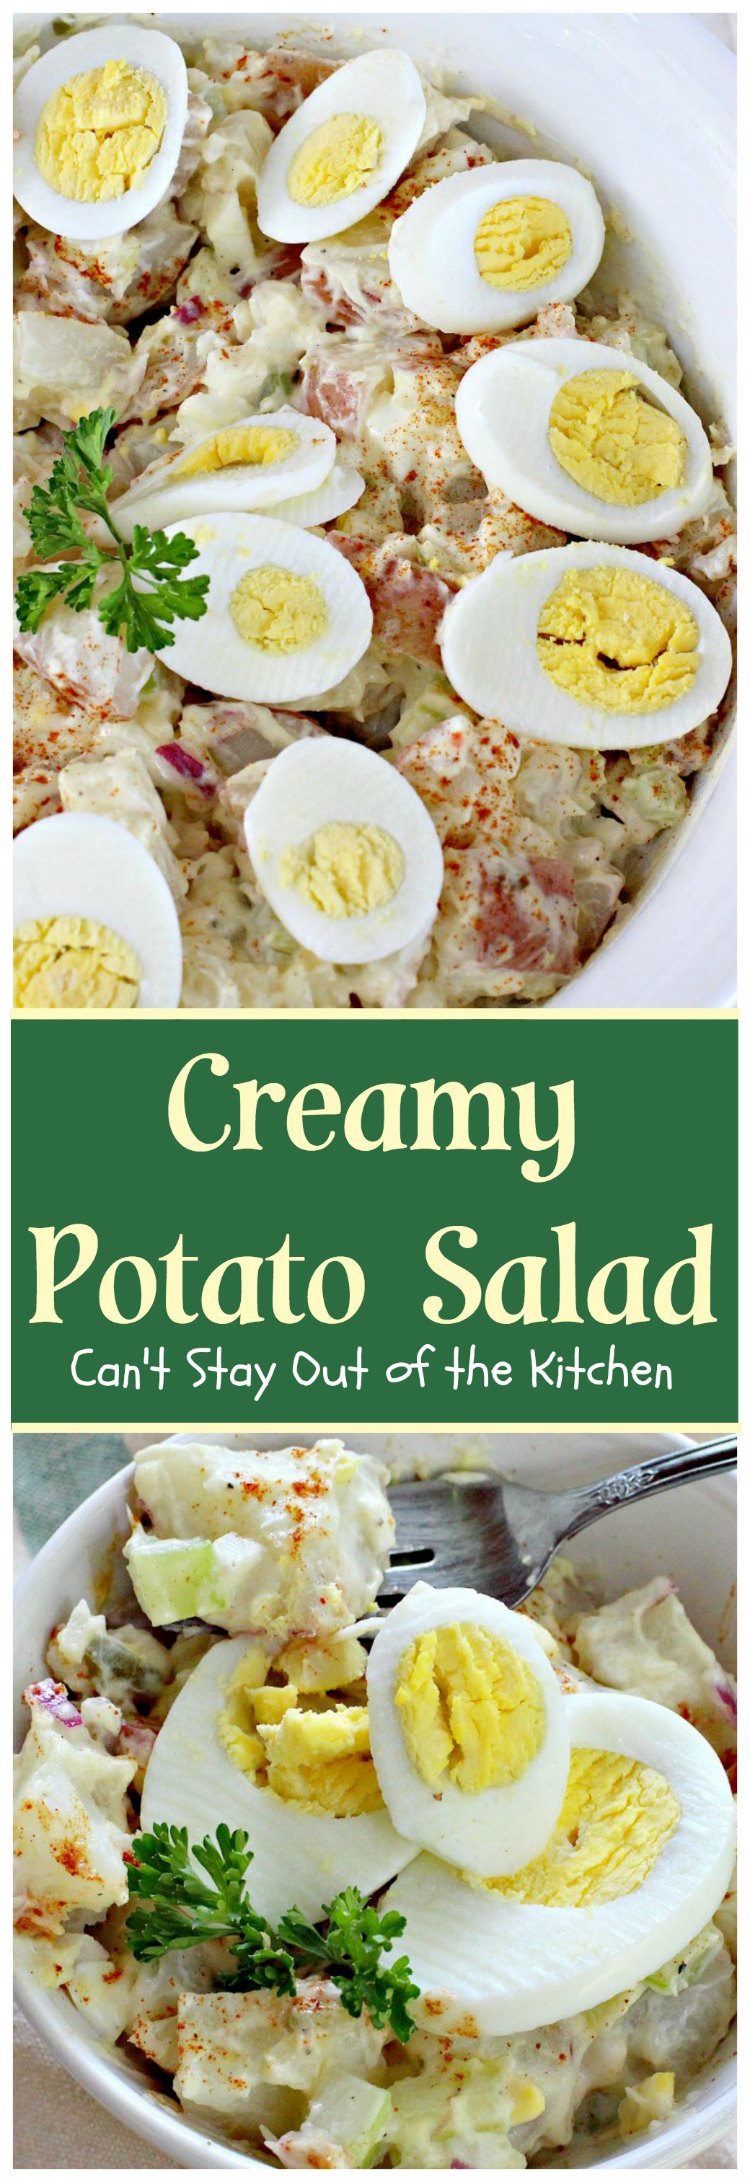 Creamy Potato Salad | Can't Stay Out of the Kitchen | This is our favorite #potatosalad recipe. Great for #MemorialDay & other summer #holiday fun. #potatoes #eggs #glutenfree